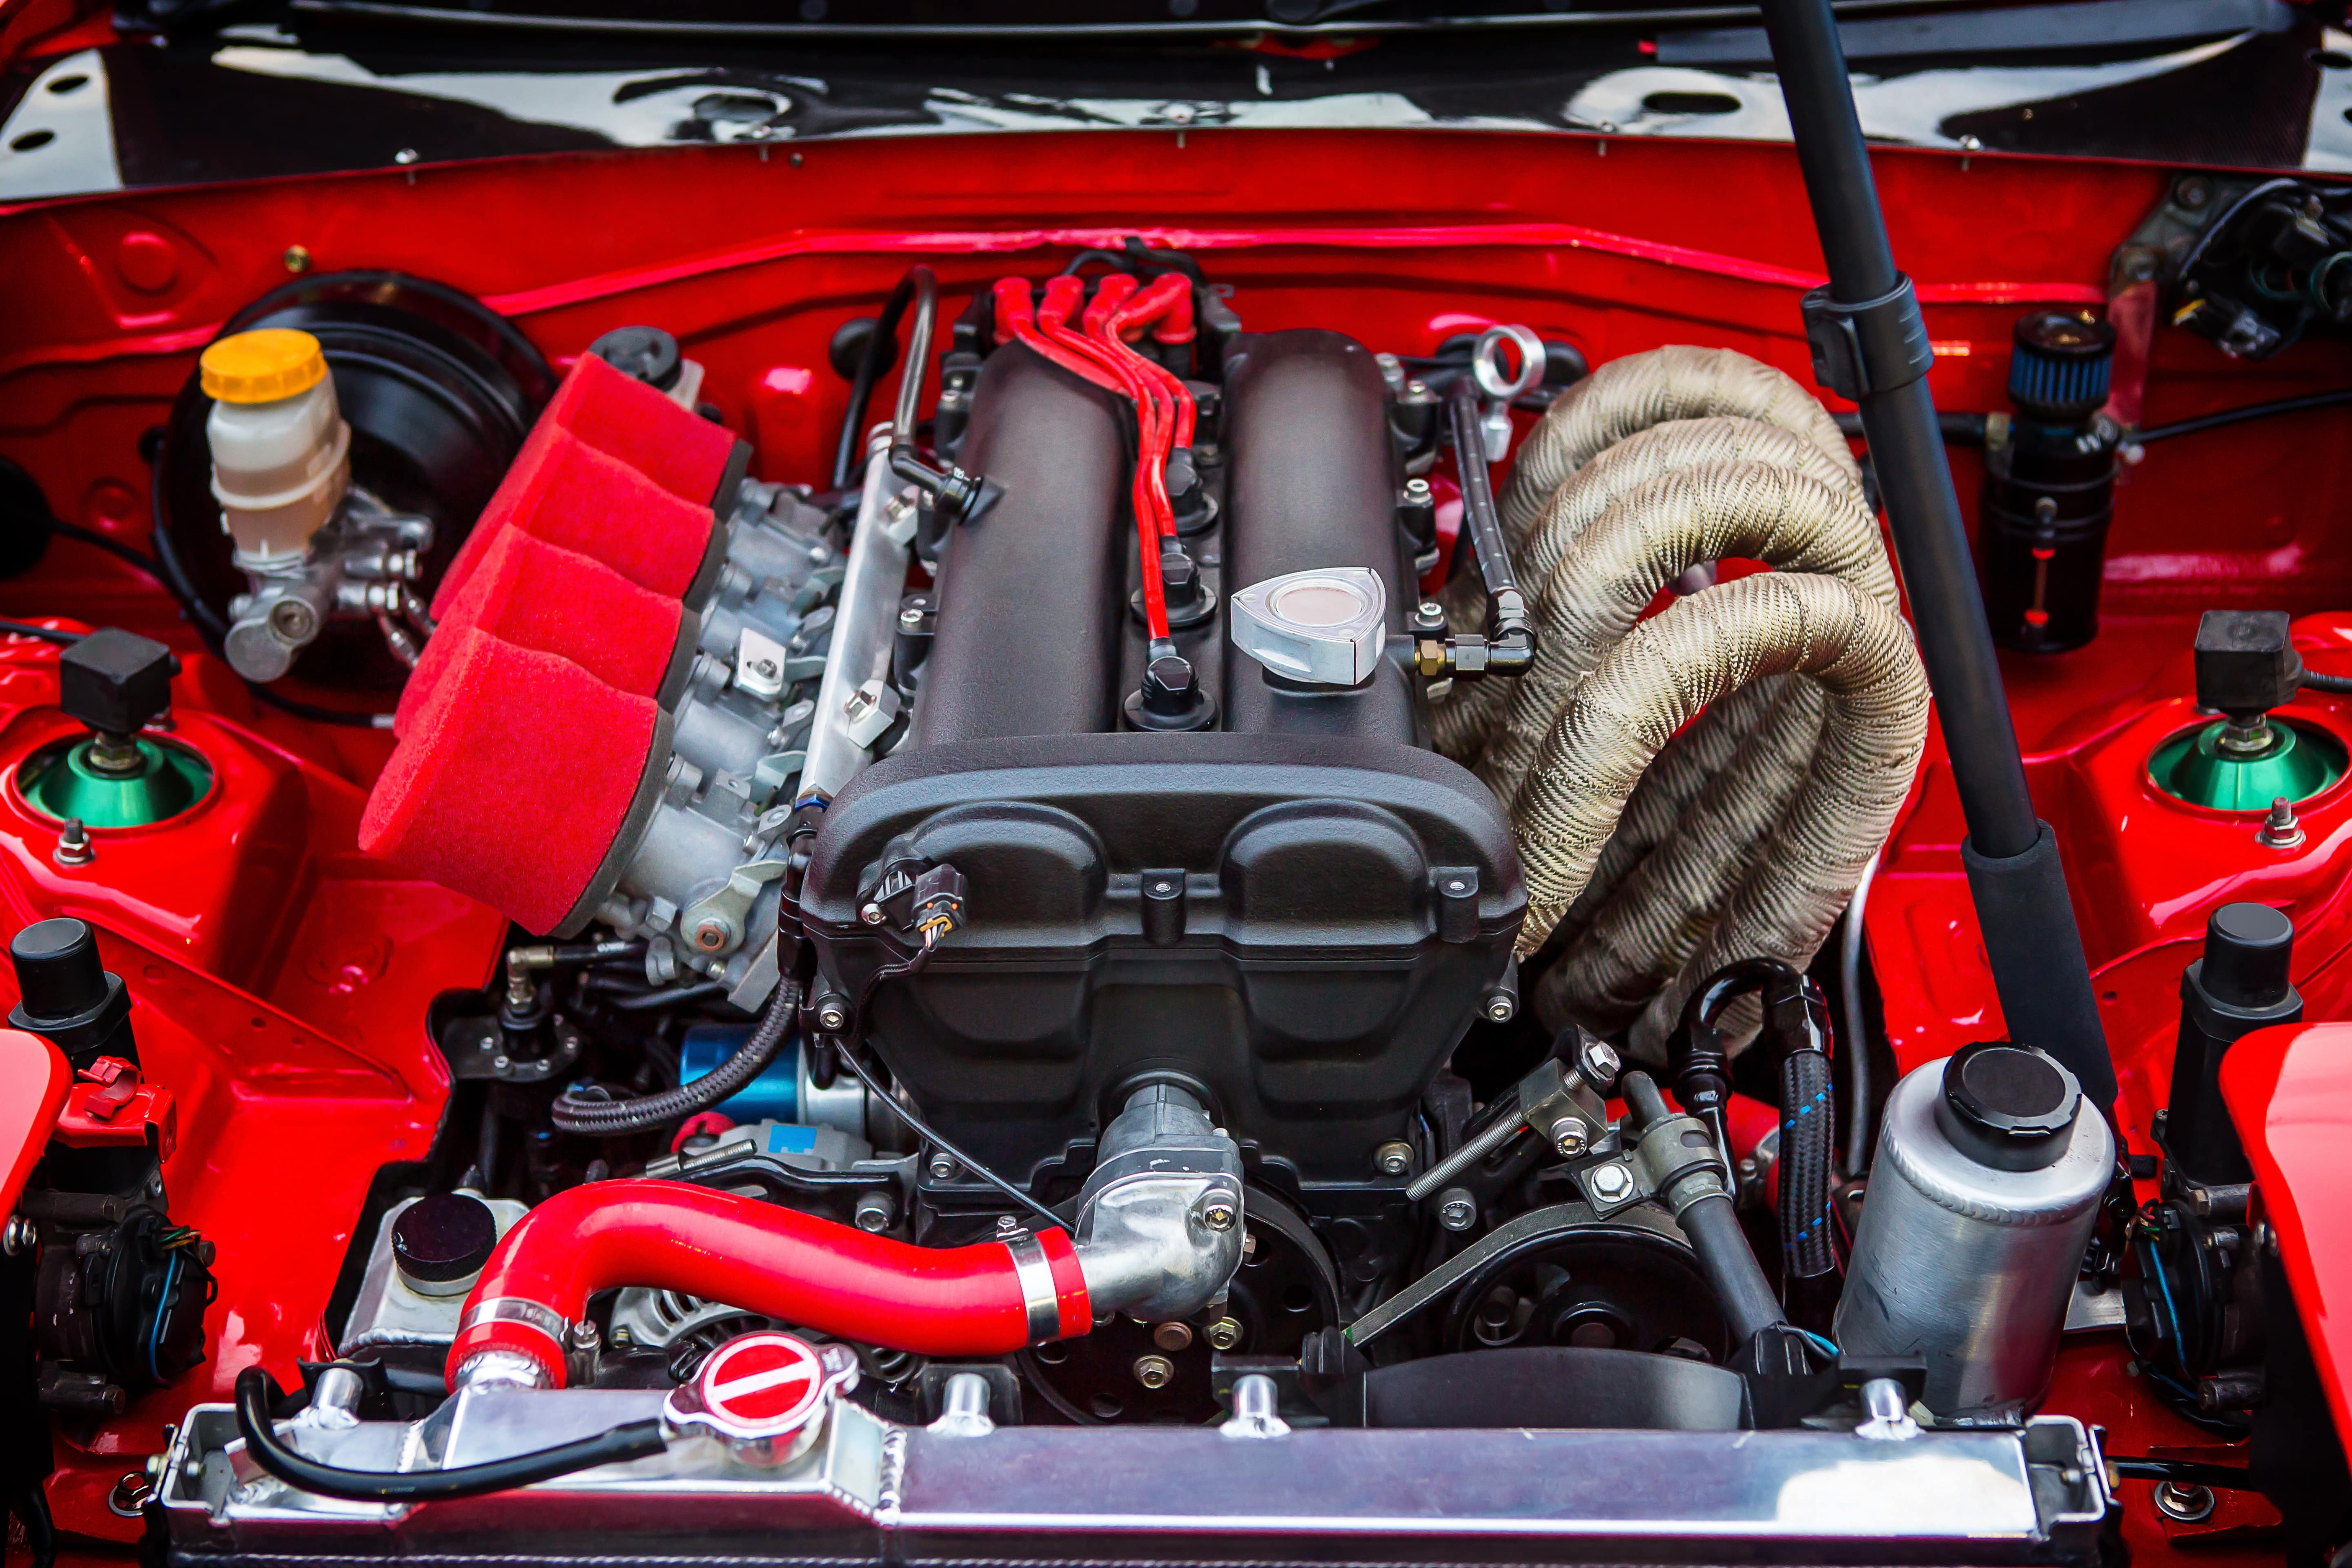 view under the hood of a red vehicle